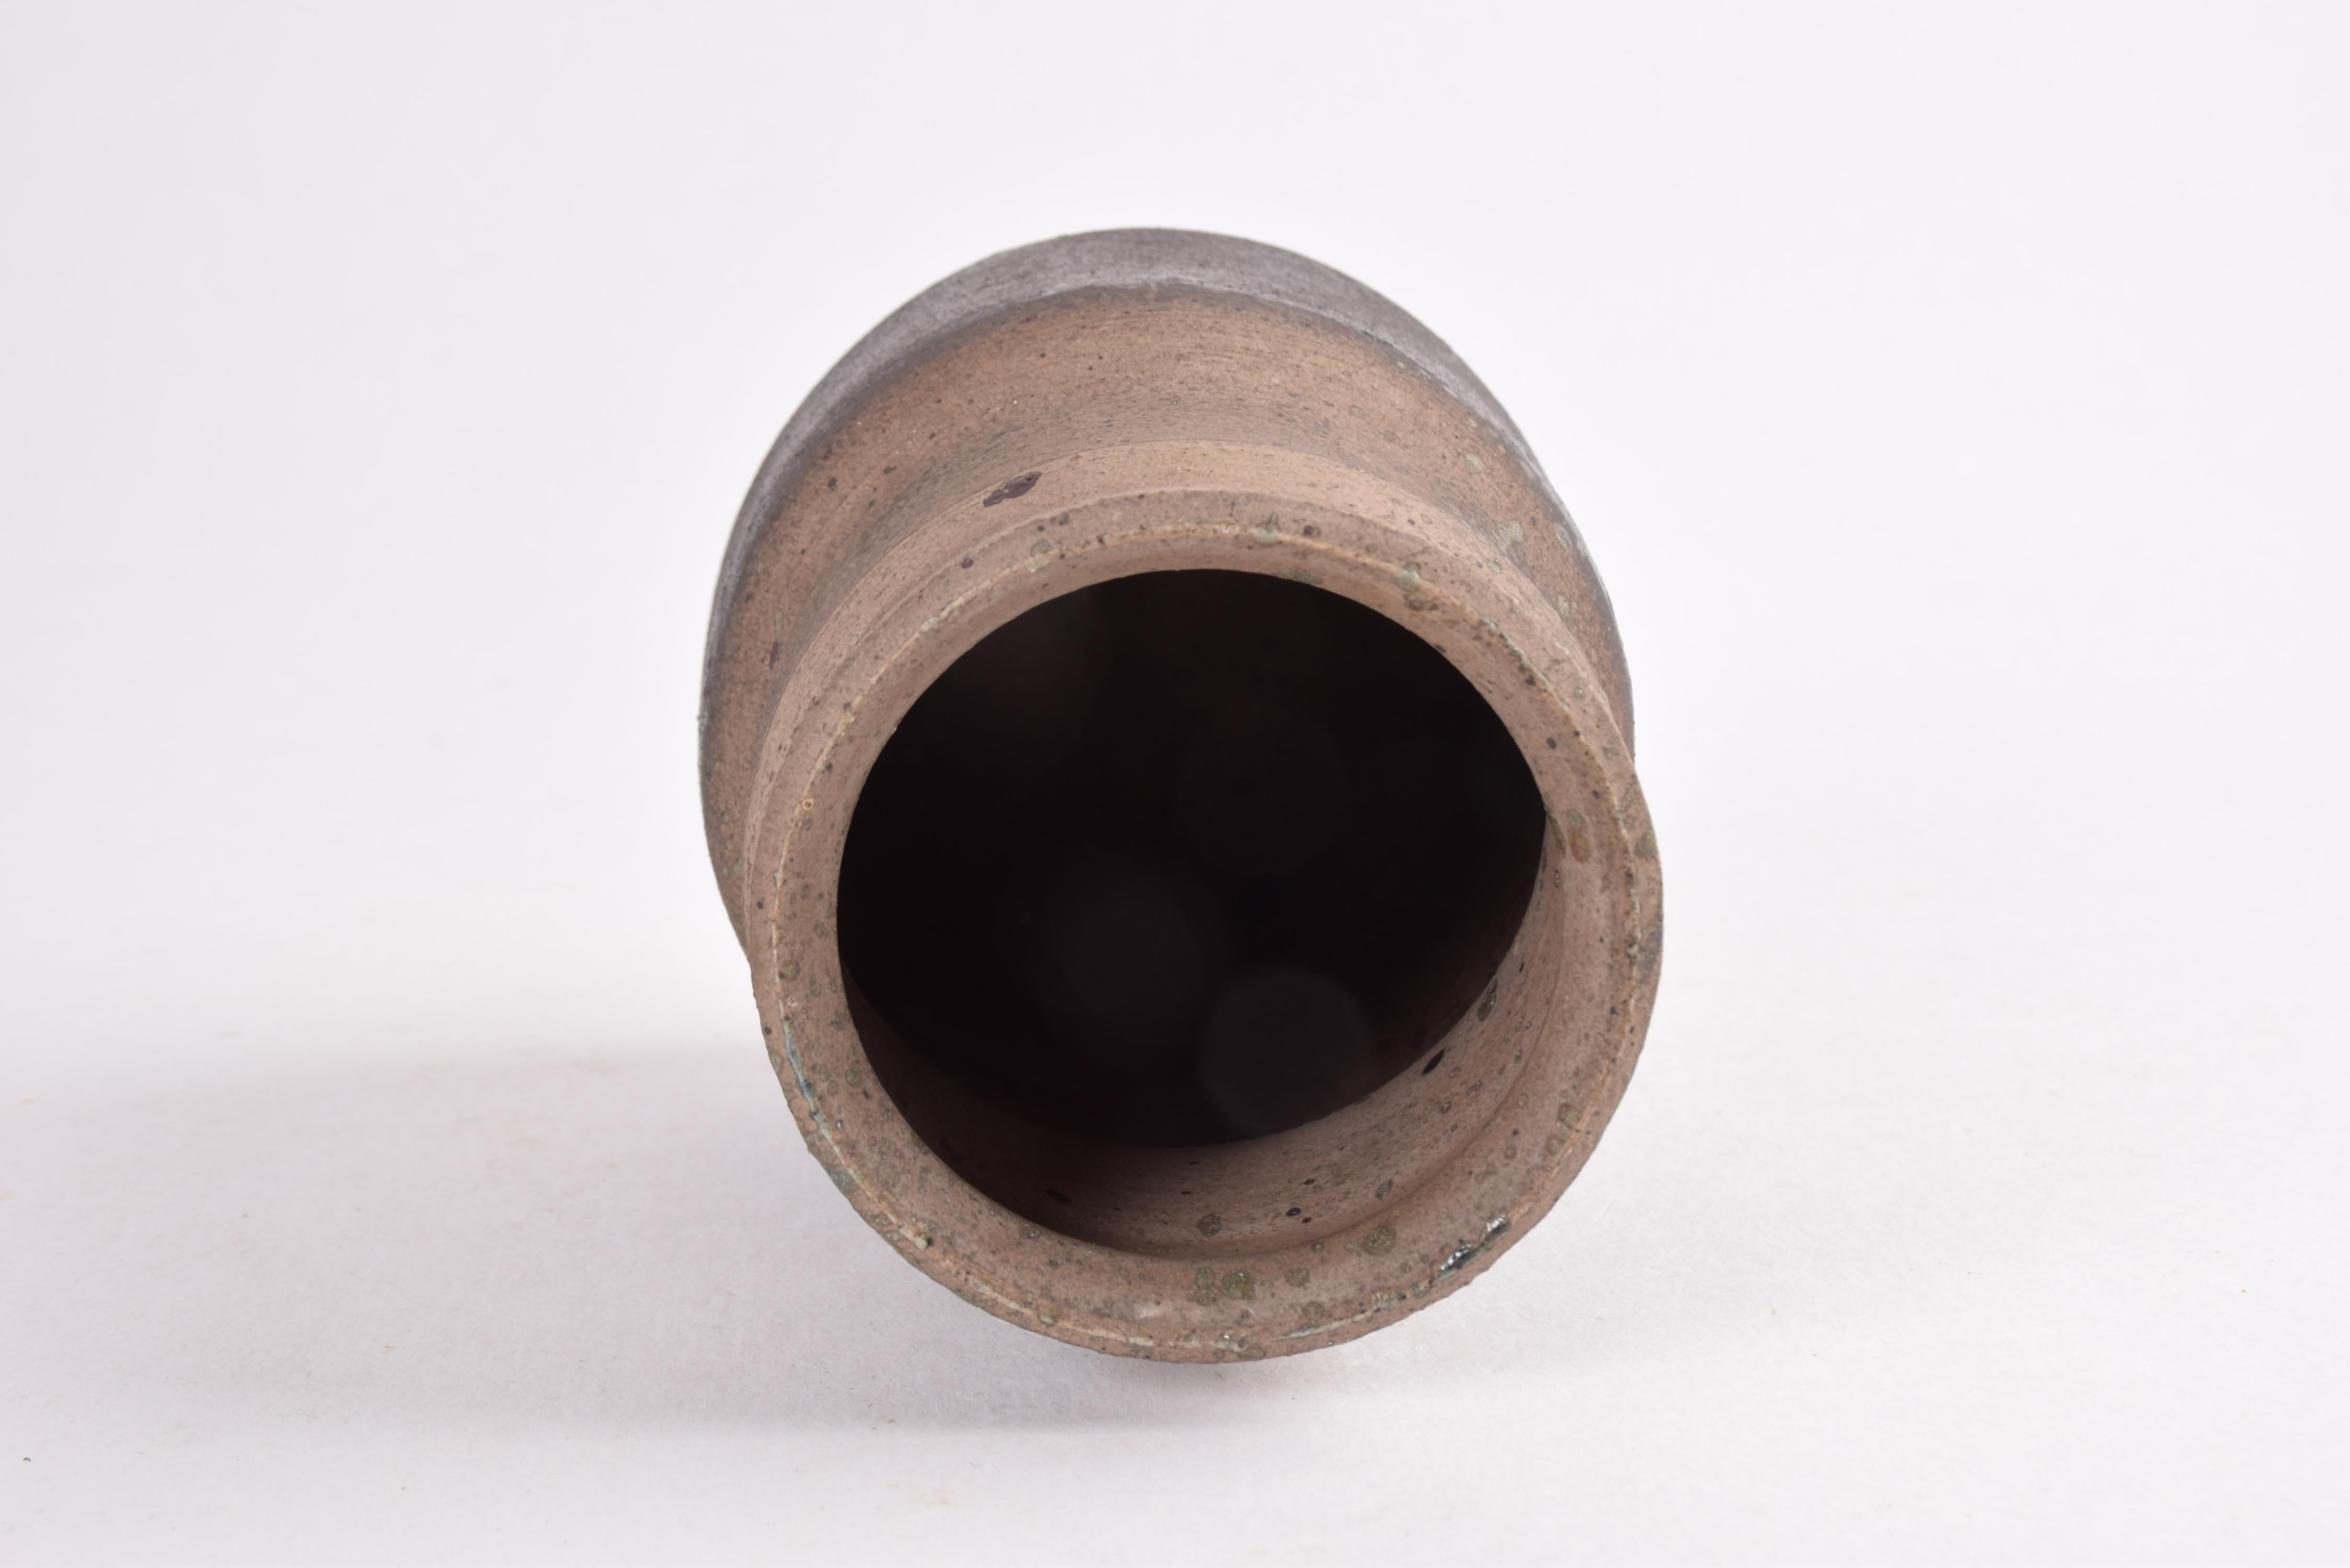 Danish Modern Studio Ceramic Vase by Chris Moes Earth Tones with Speckles, 1970s For Sale 1